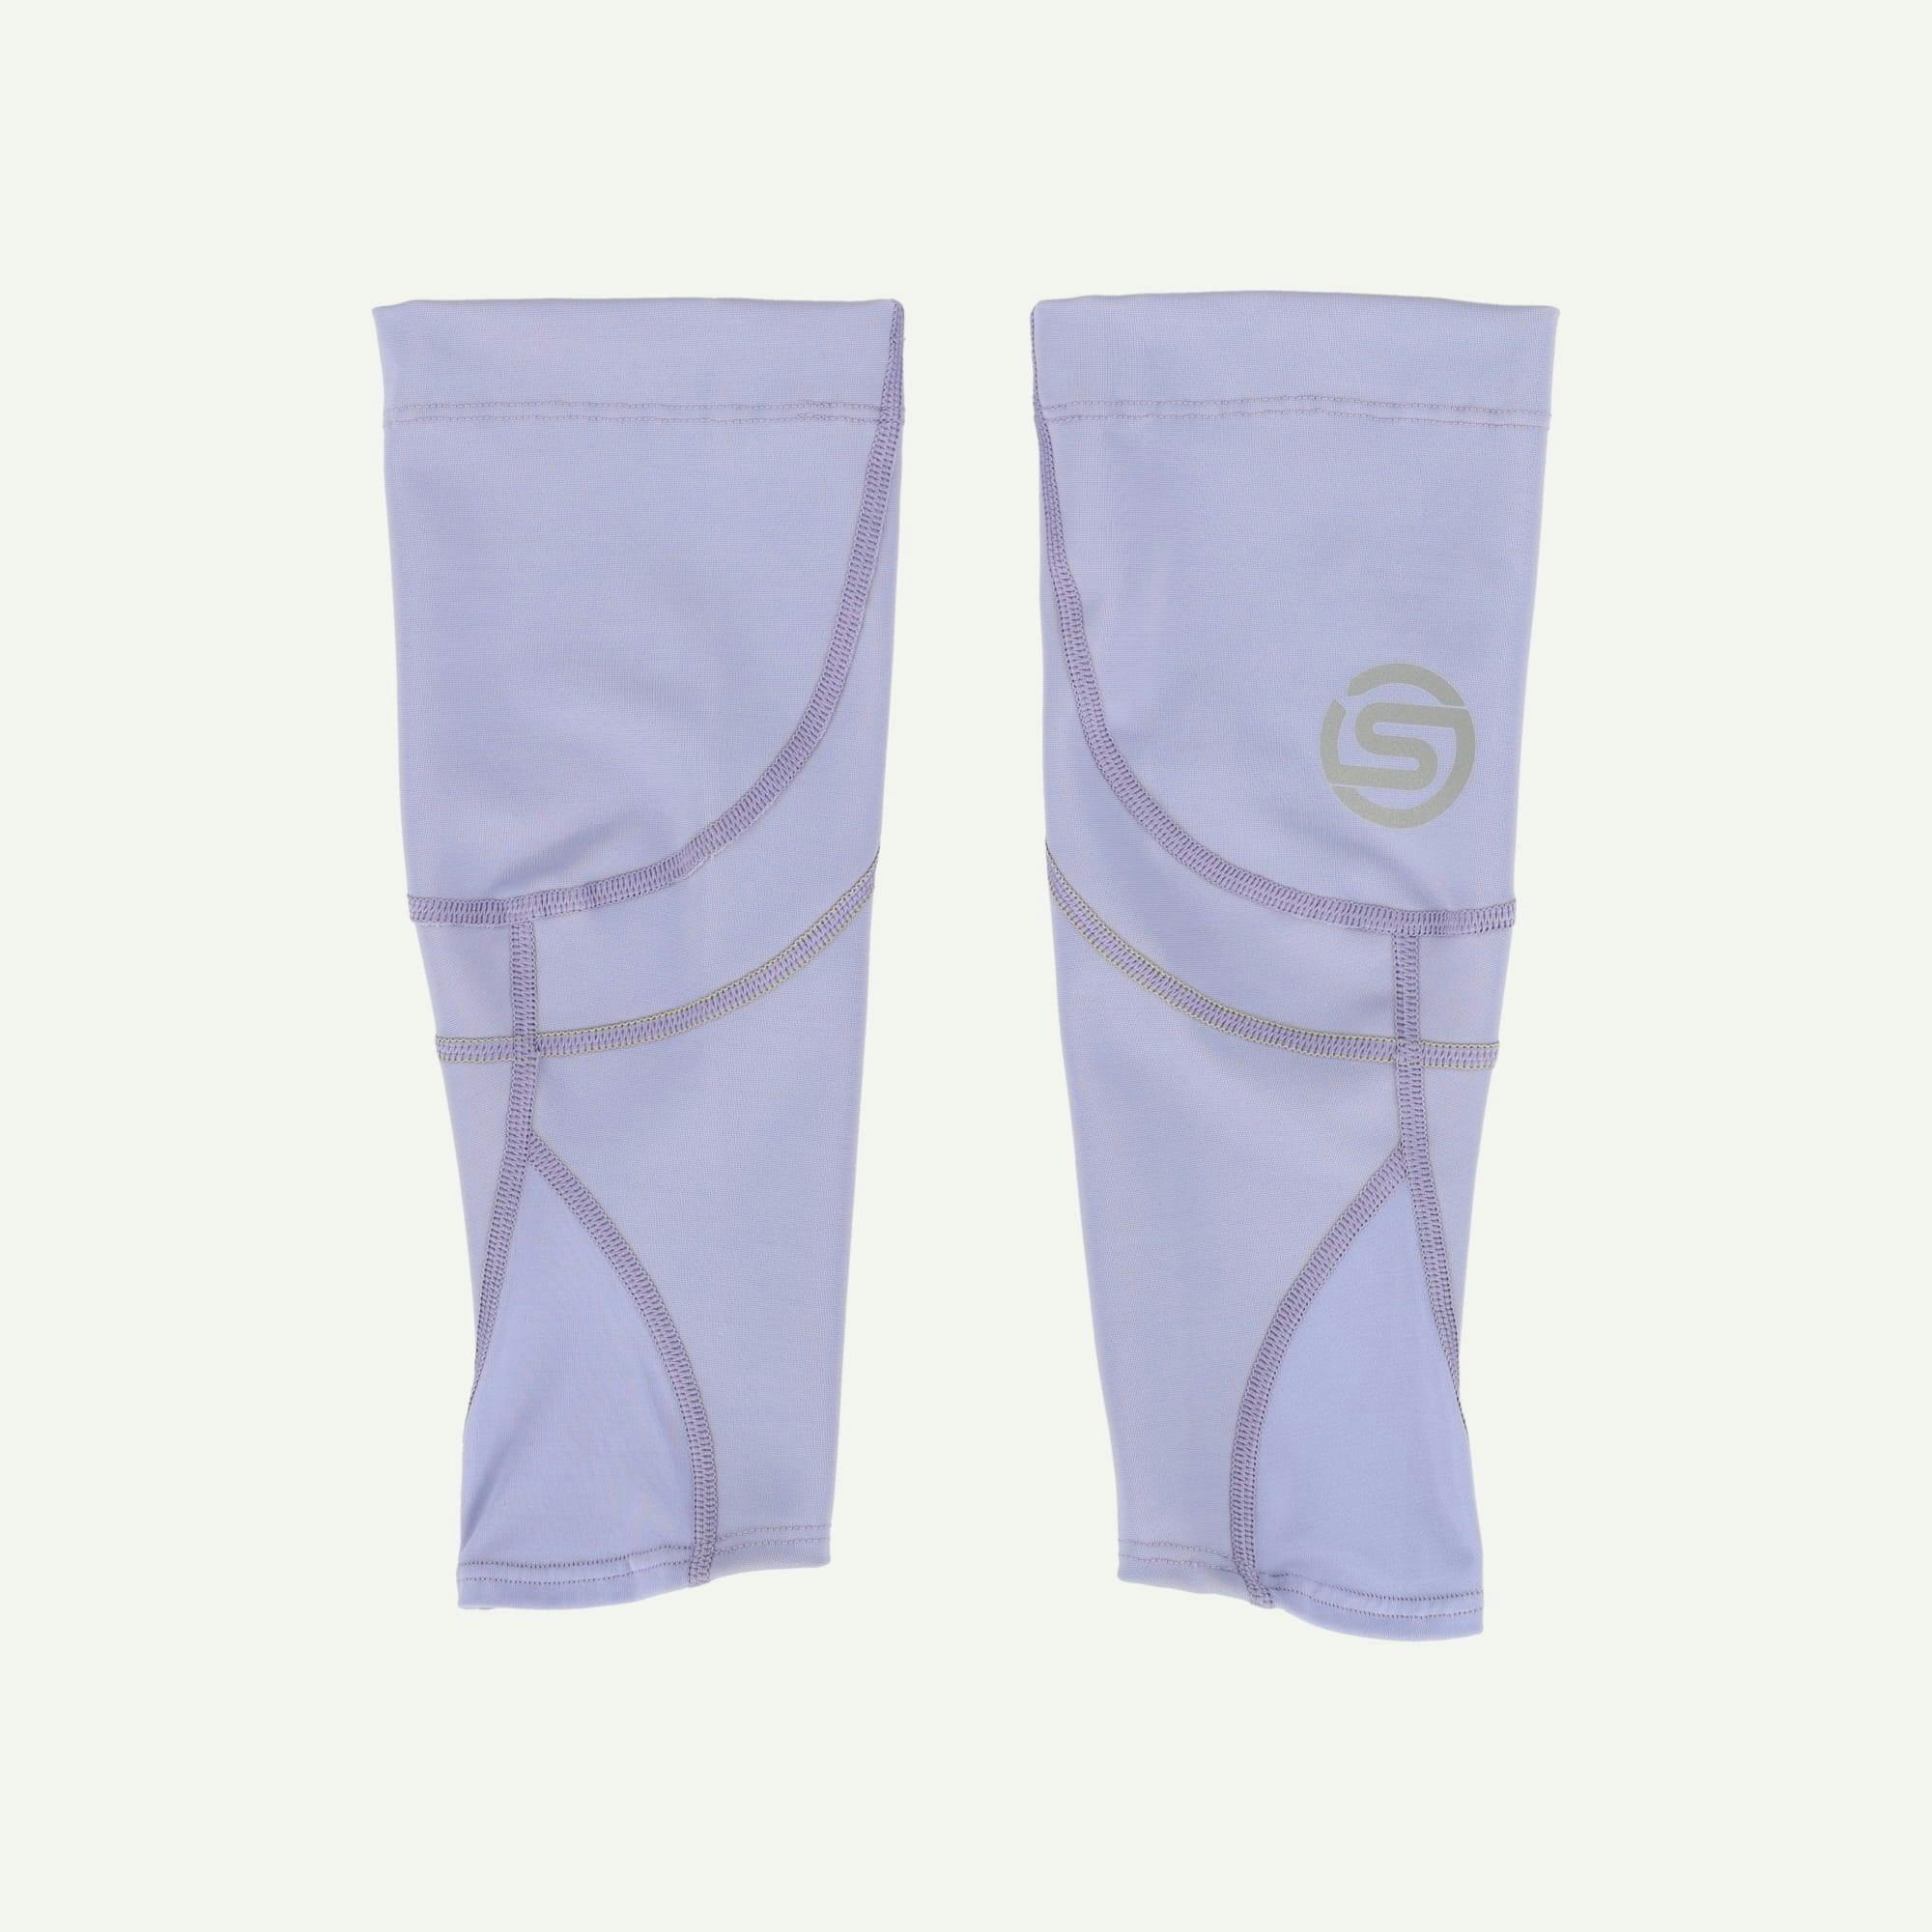 SKINS Compression As new Purple Series 3 Calf Sleeves